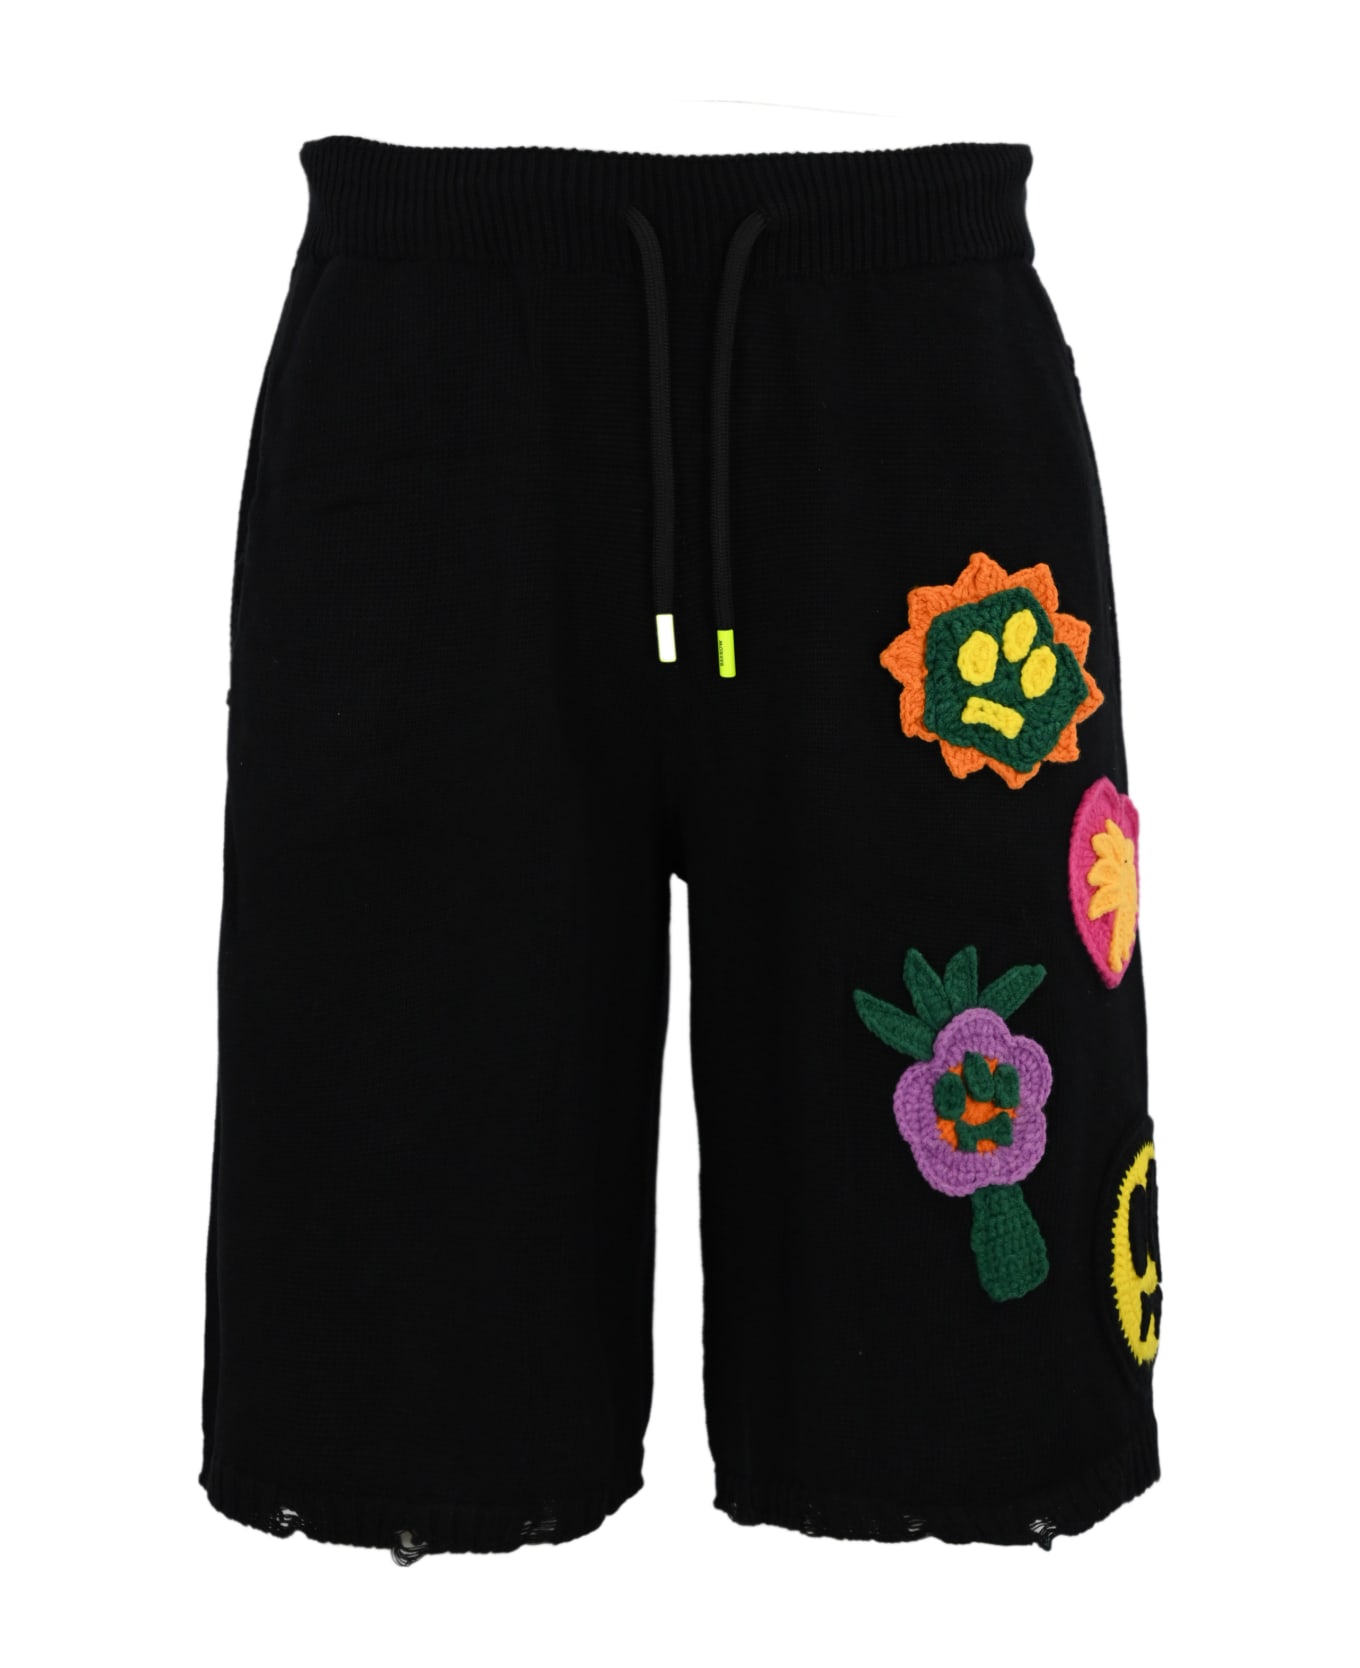 Barrow Knitted Bermuda Shorts With Crochet Applications - Black